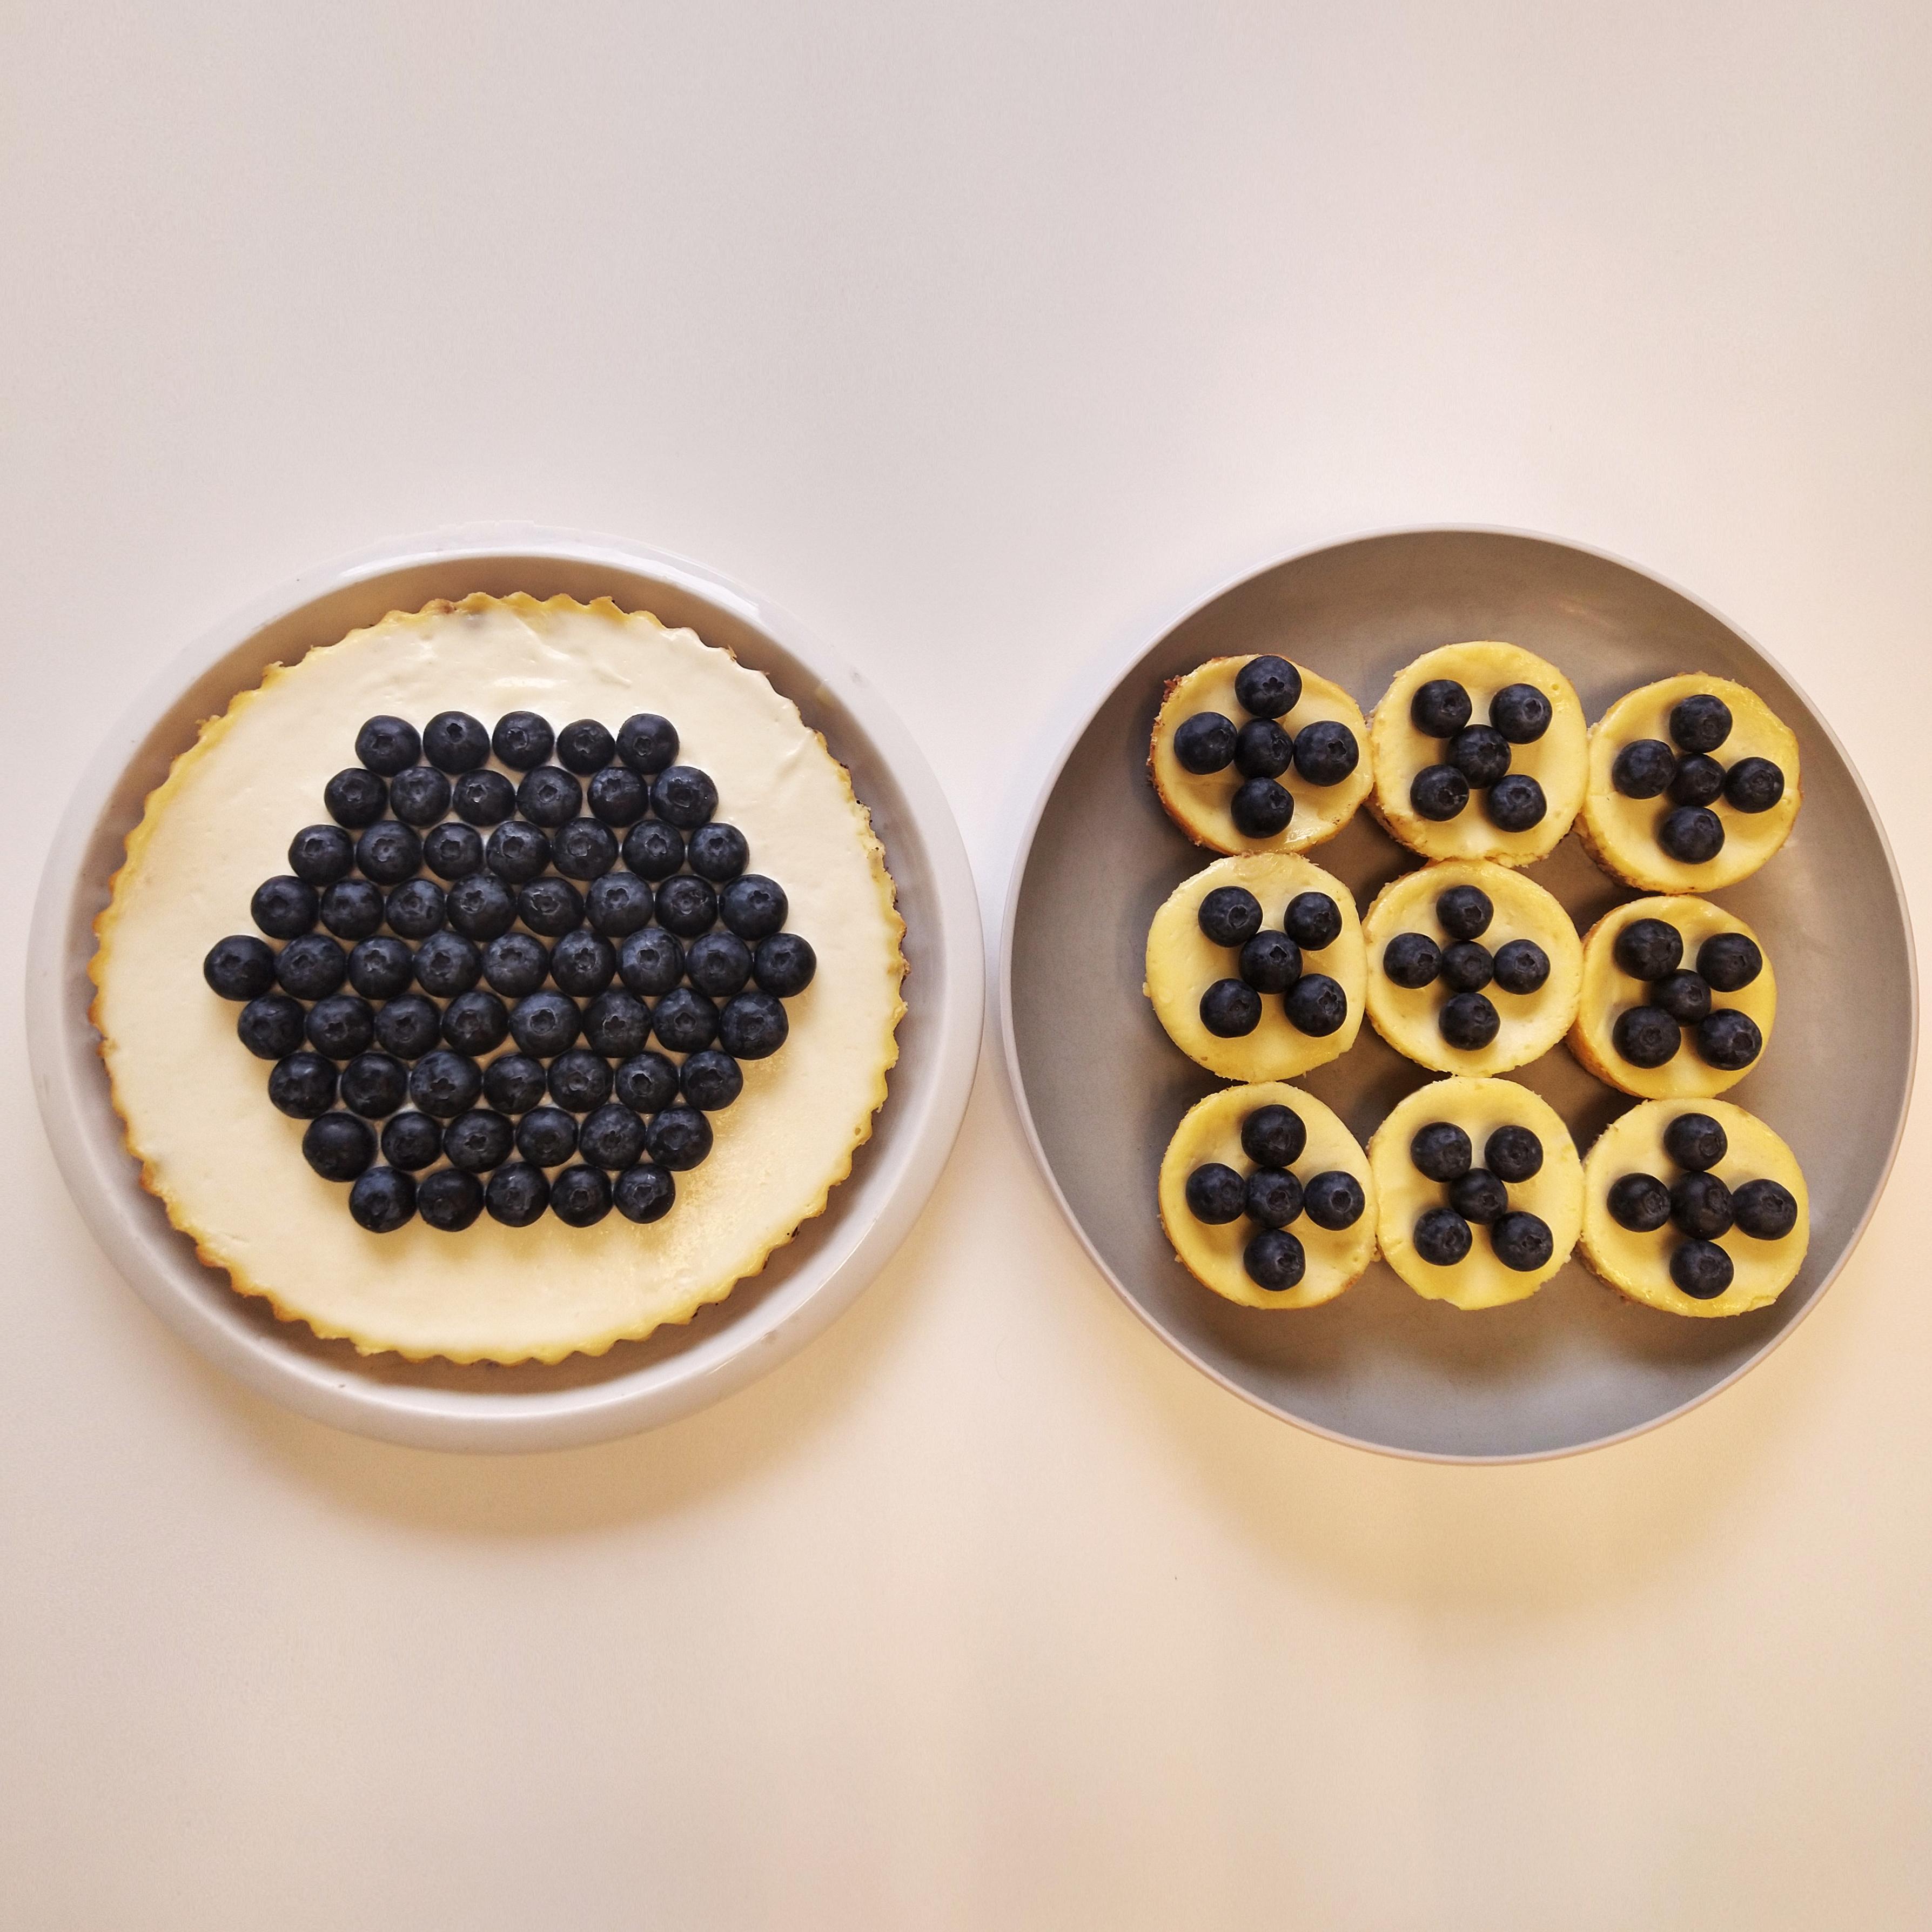 Cheesecakes packed with blueberries.